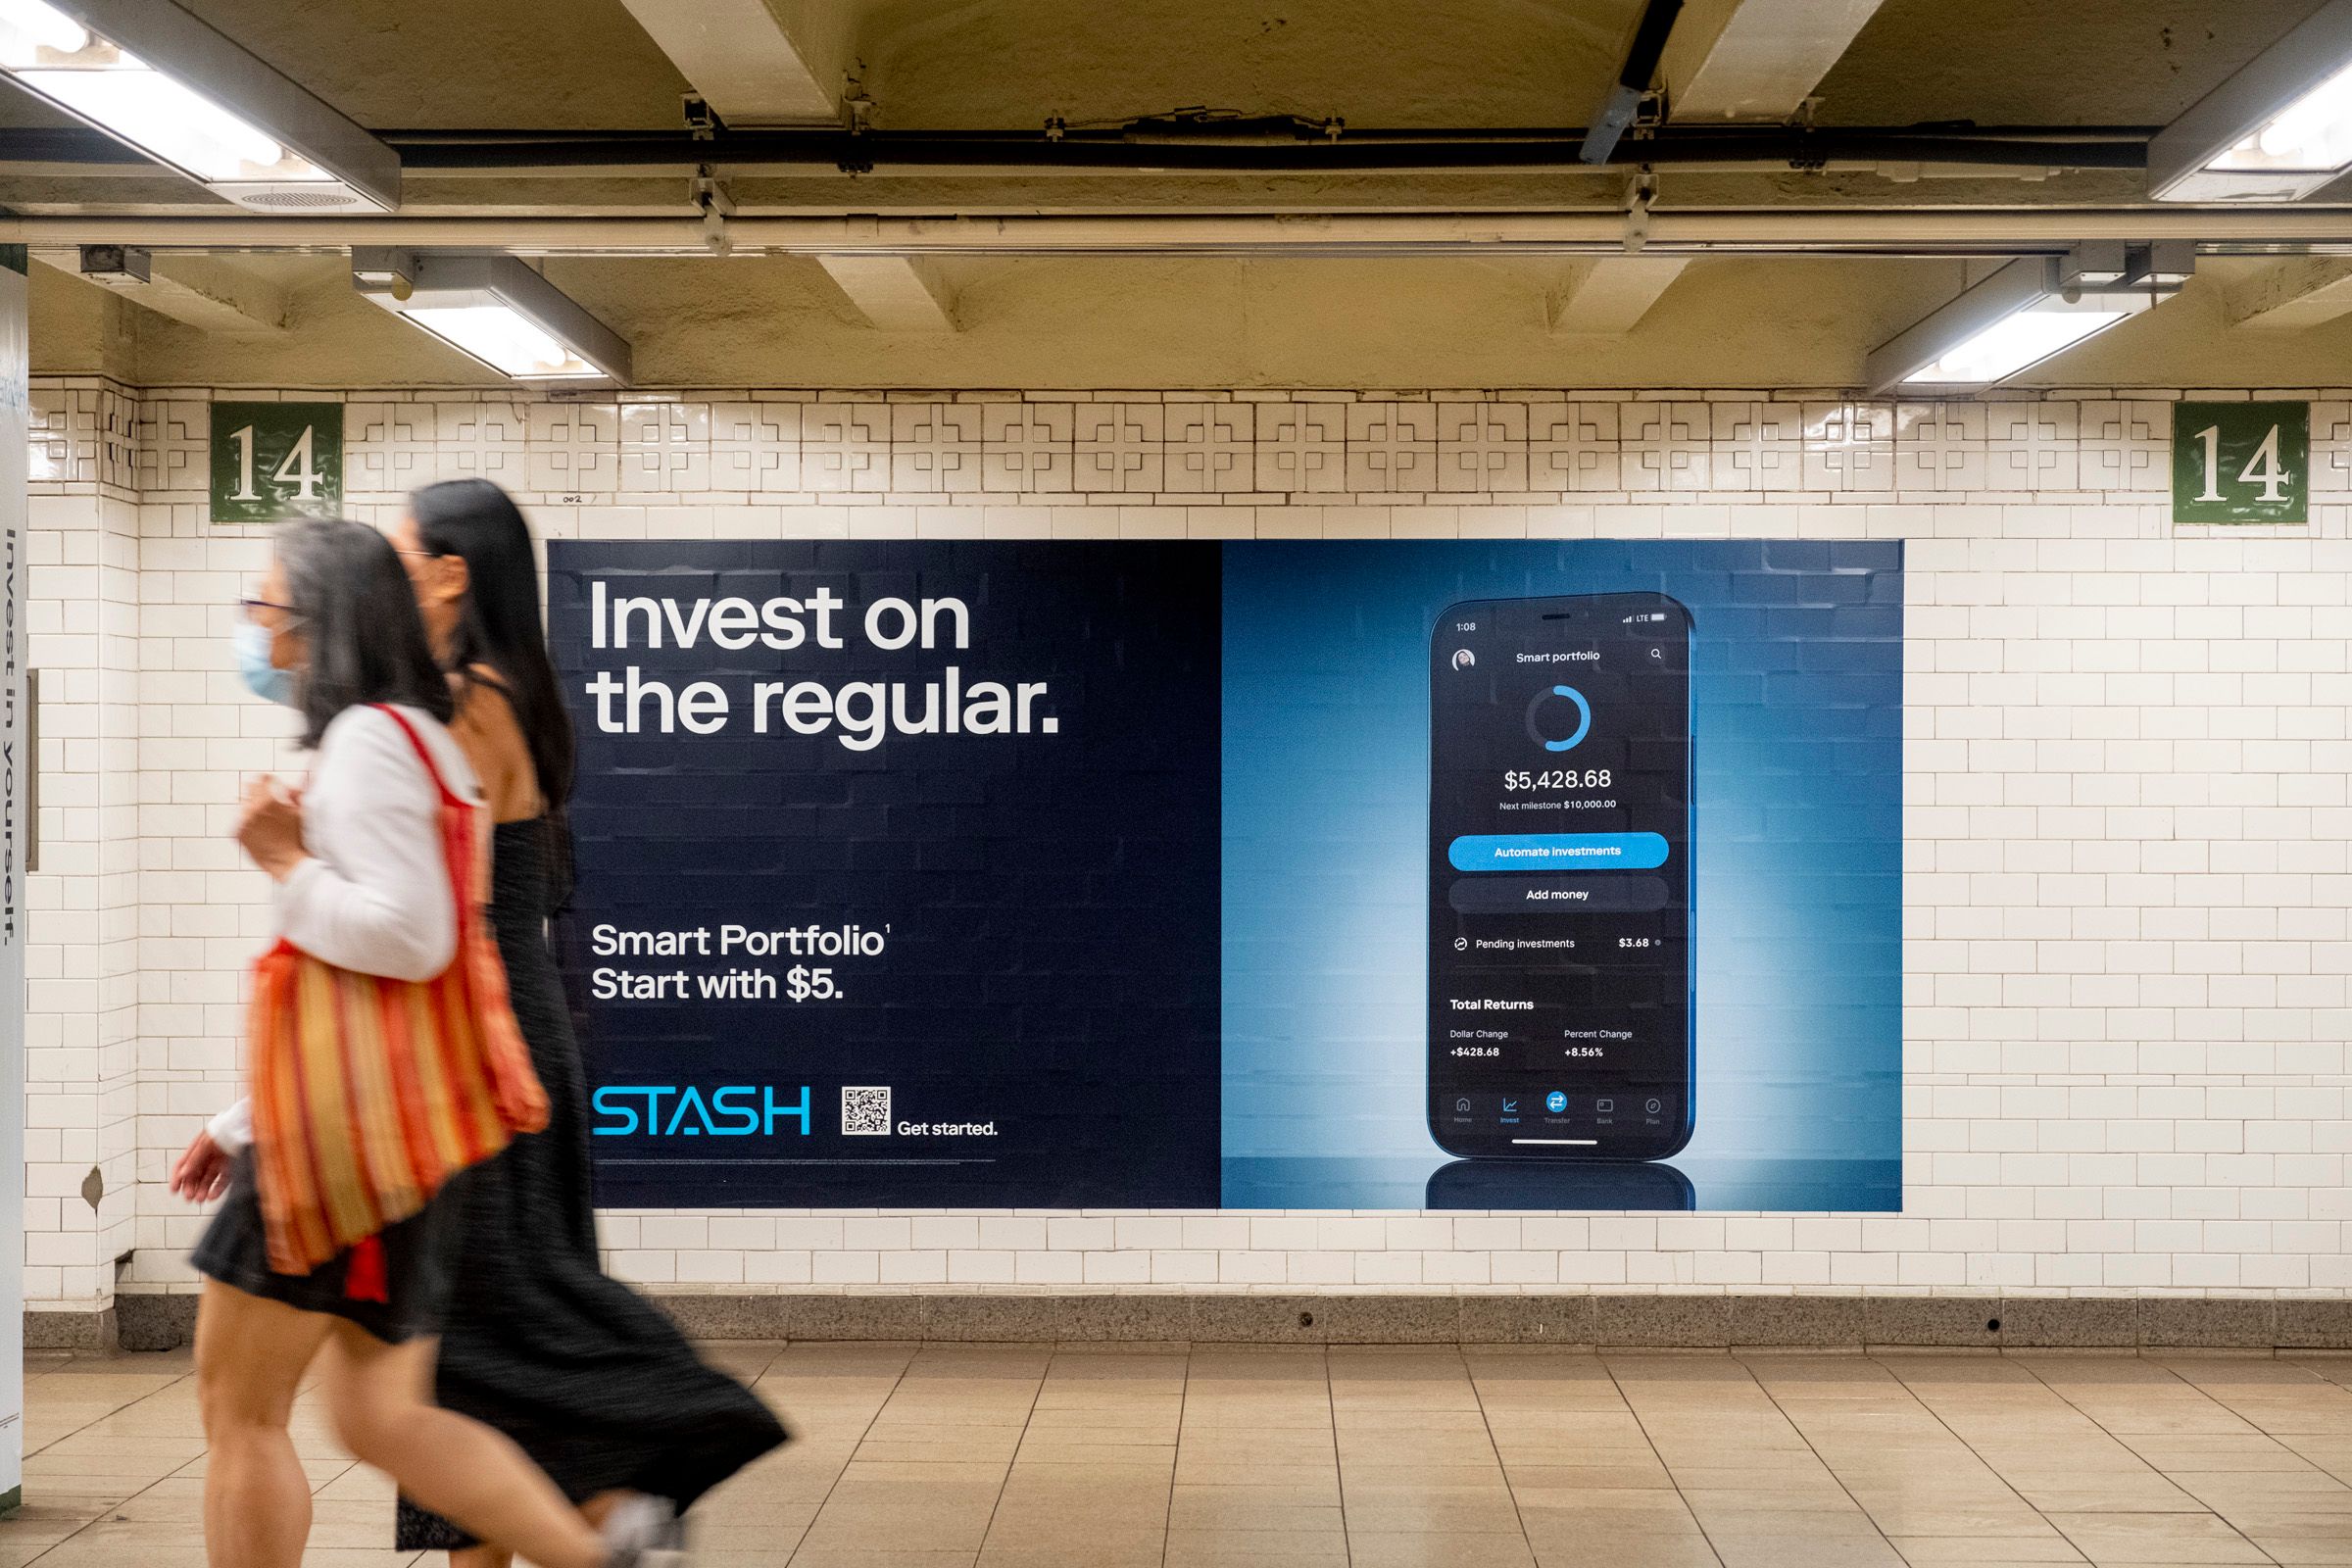 ‘You can make investing as regular as your route’: Behind Stash’s new marketing campaign against day trading